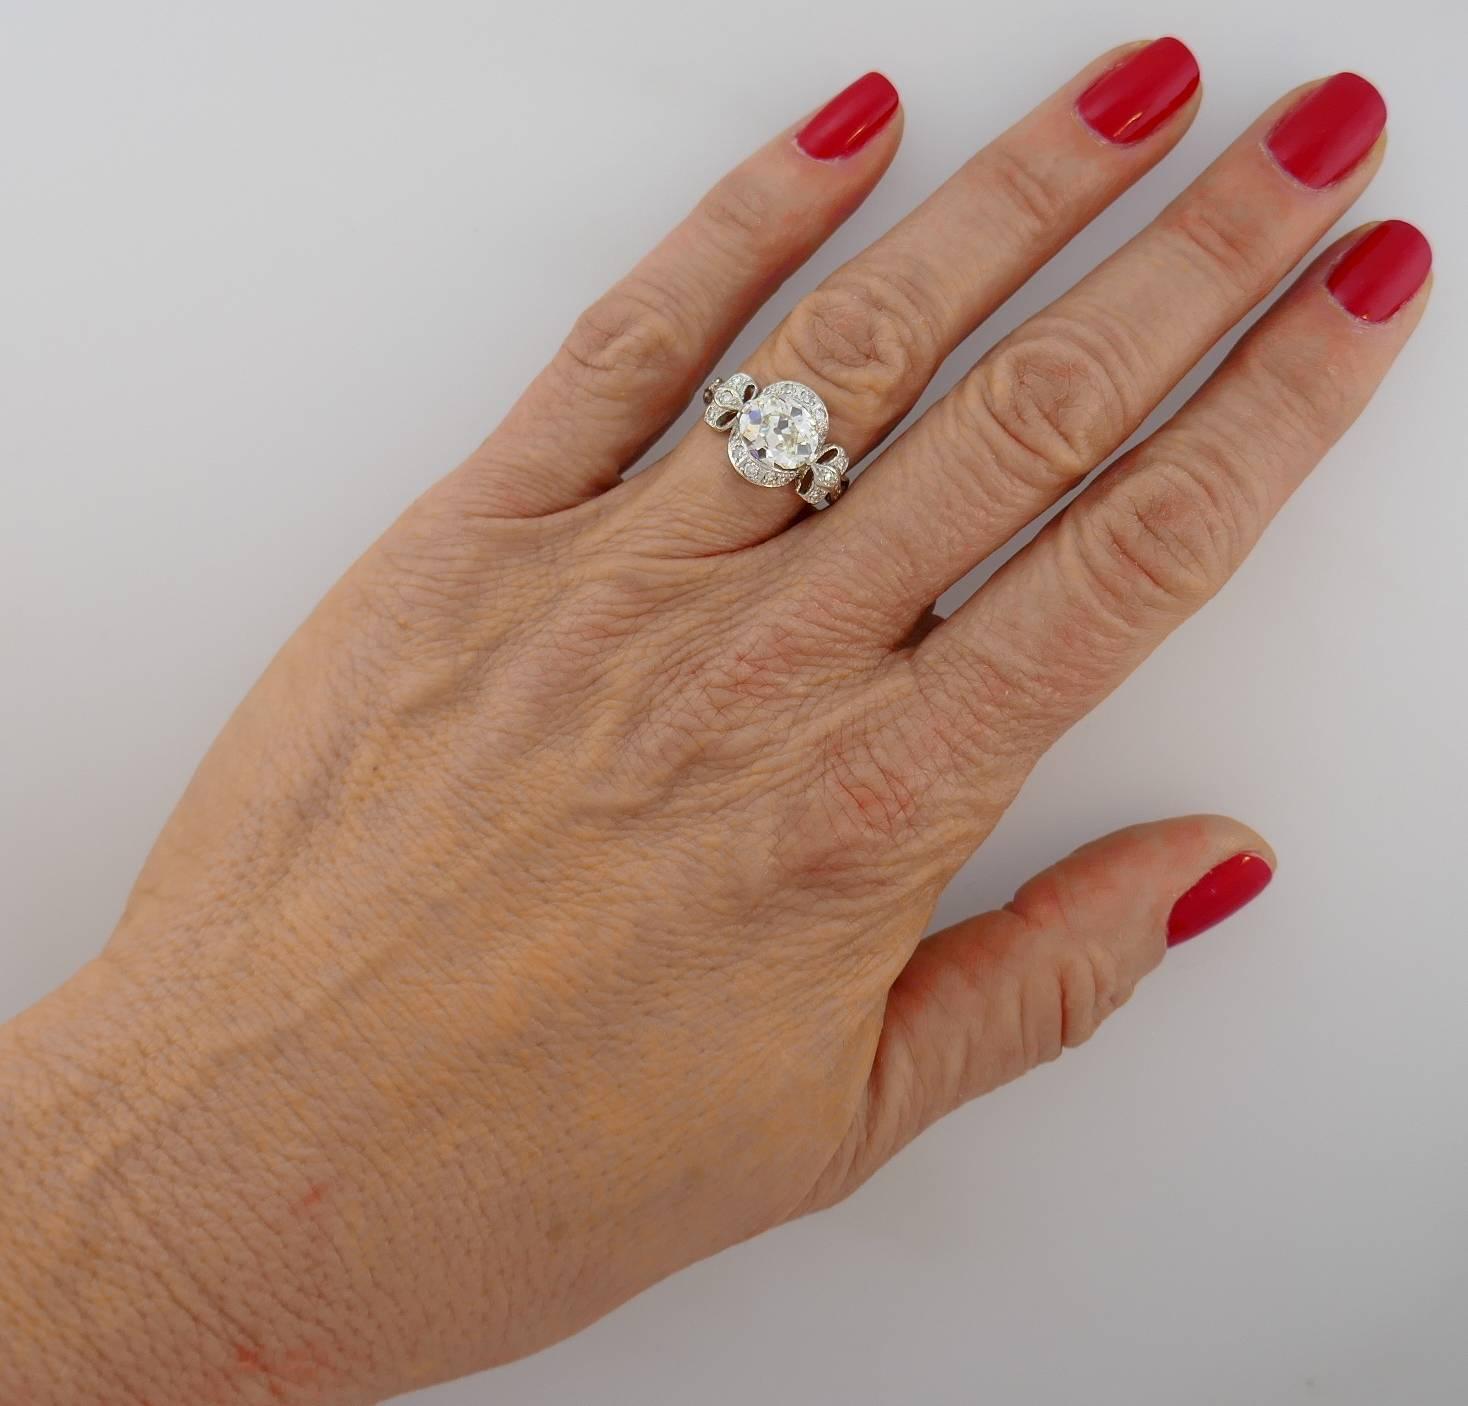 Classic Art Deco ring created in the 1930's. Elegant, timeless, feminine and wearable, the ring is a great addition to your jewelry collection. It can also make a beautiful engagement ring.
Made of platinum (tested), the ring features an